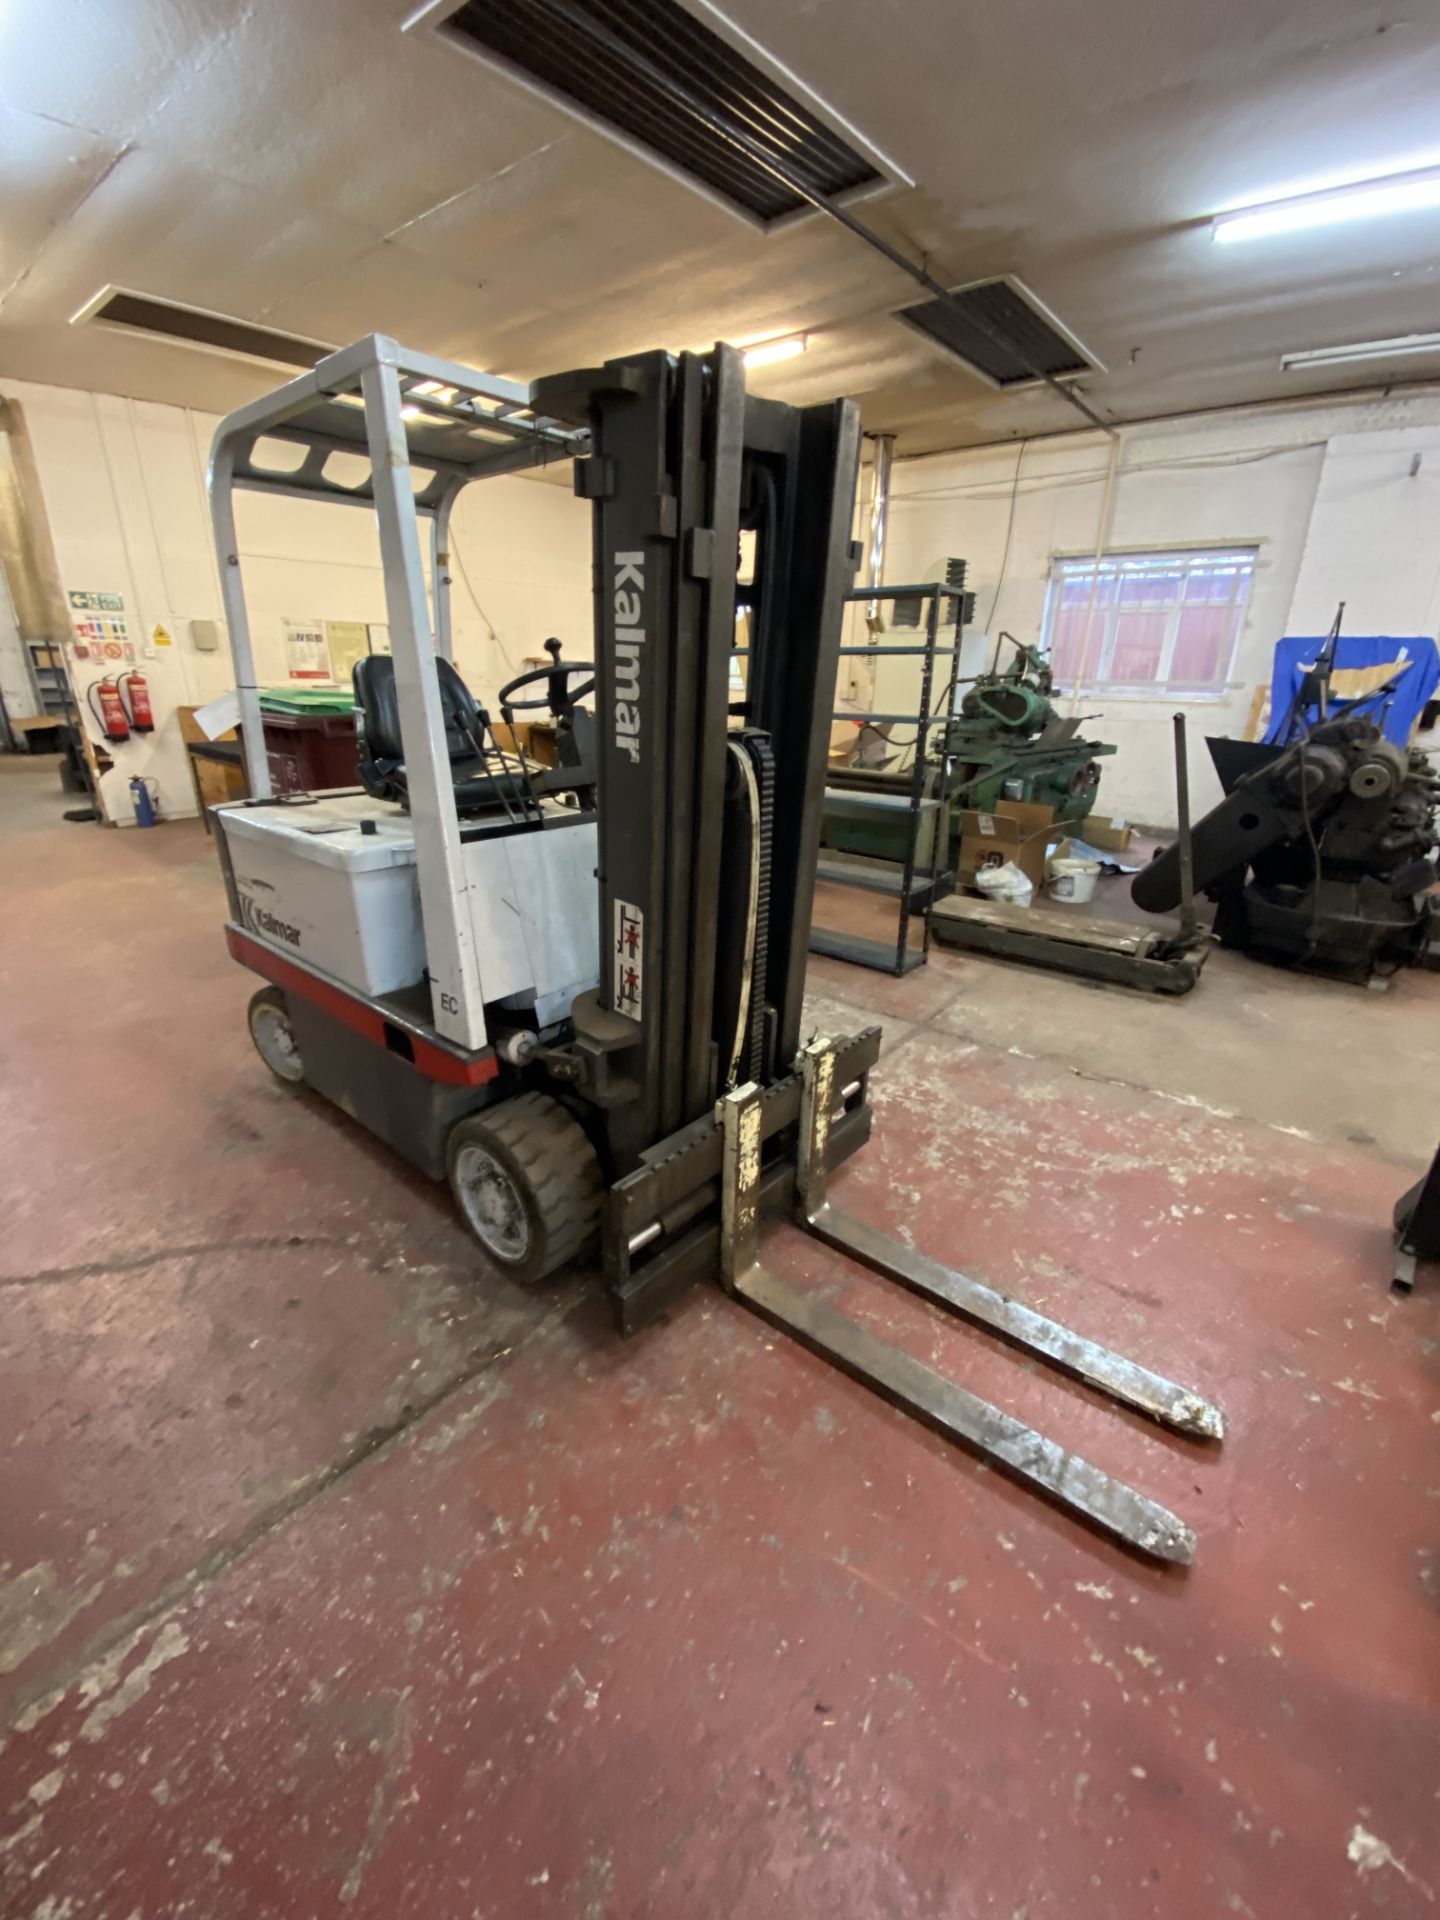 Kalmar EC2.5 541-816 BATTERY ELECTRIC FORK LIFT TRUCK, serial no. 111100534, year of manufacture